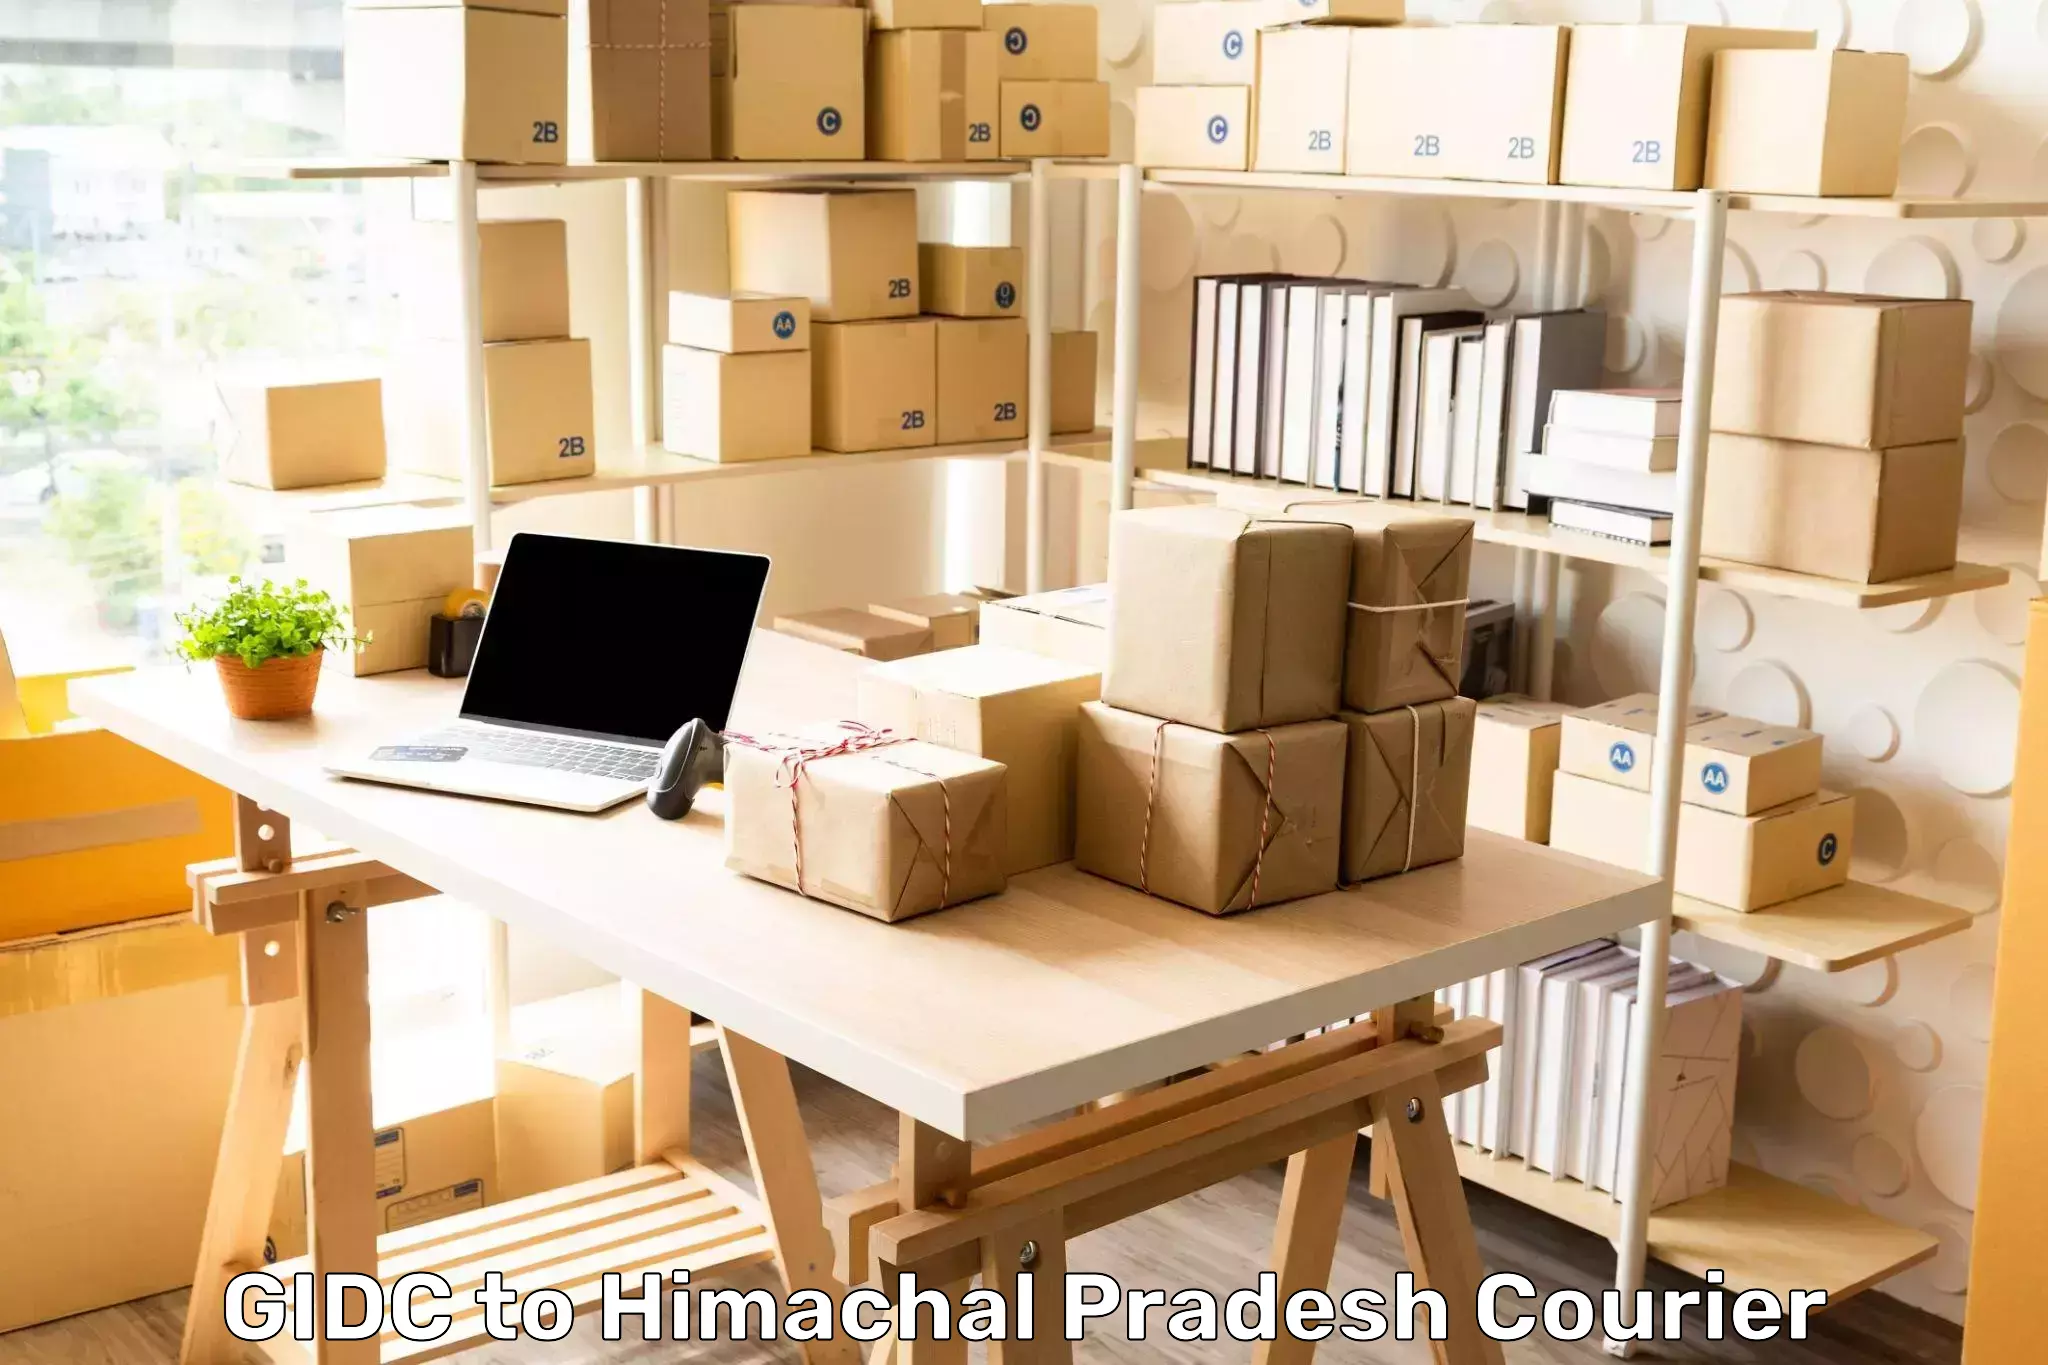 Business courier solutions in GIDC to Himachal Pradesh